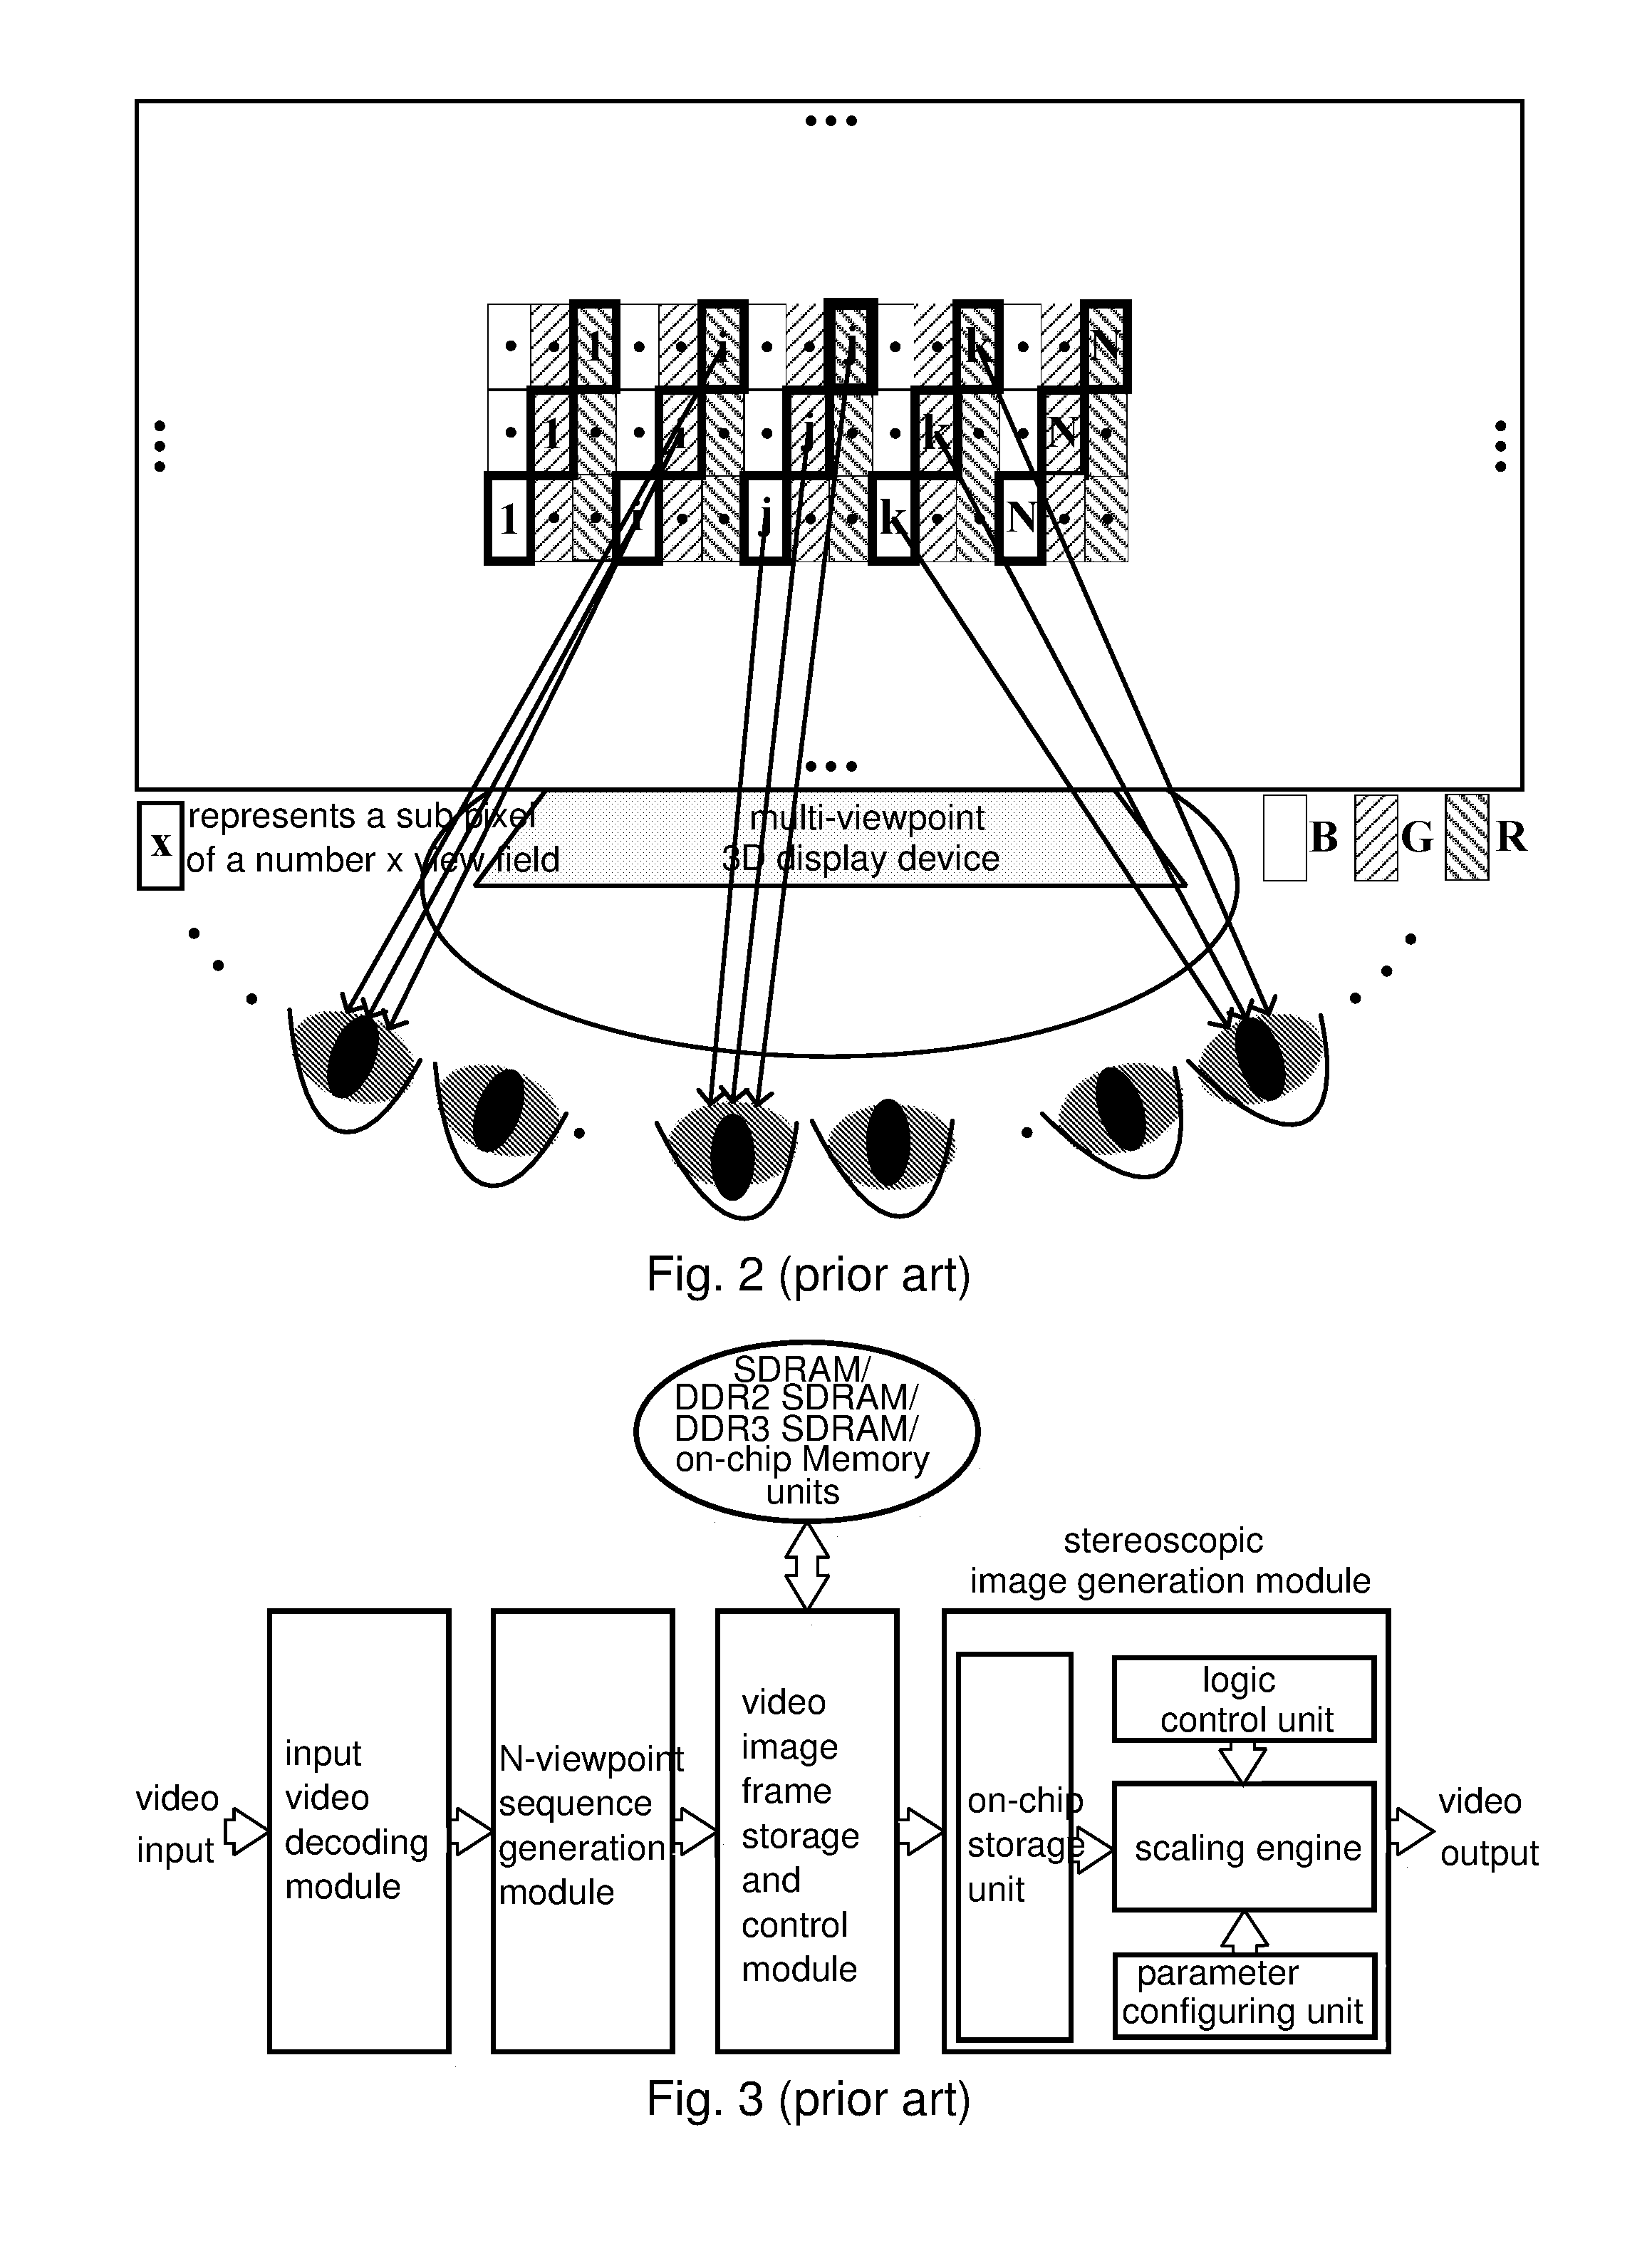 Parallel scaling engine for multi-view 3DTV display and method thereof